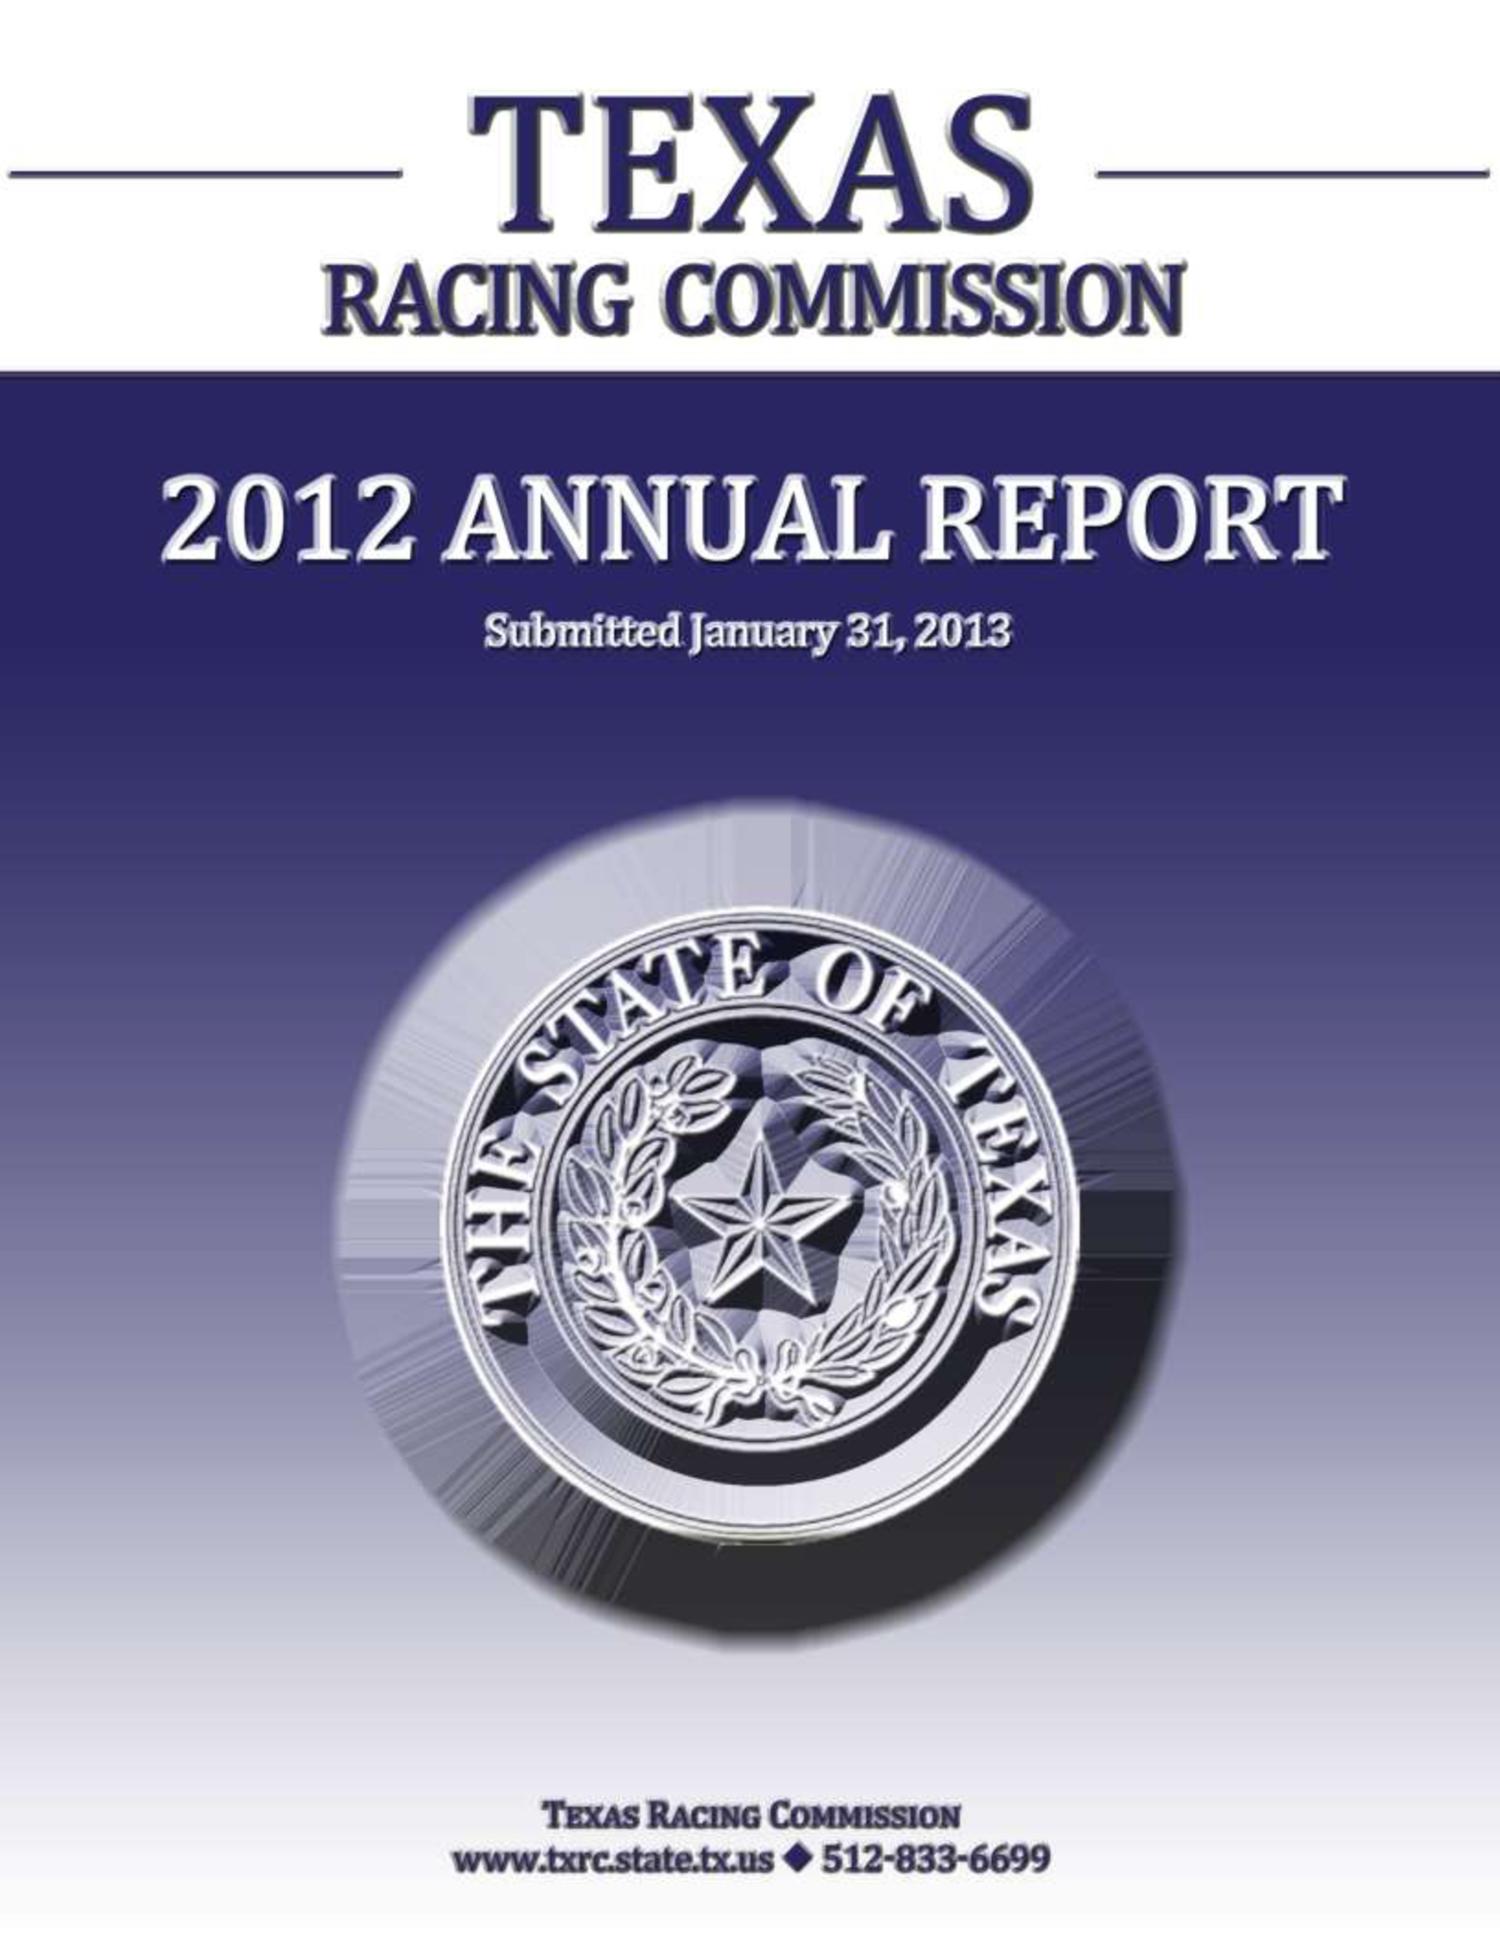 Texas Racing Commission Annual Report: 2012
                                                
                                                    Front Cover
                                                